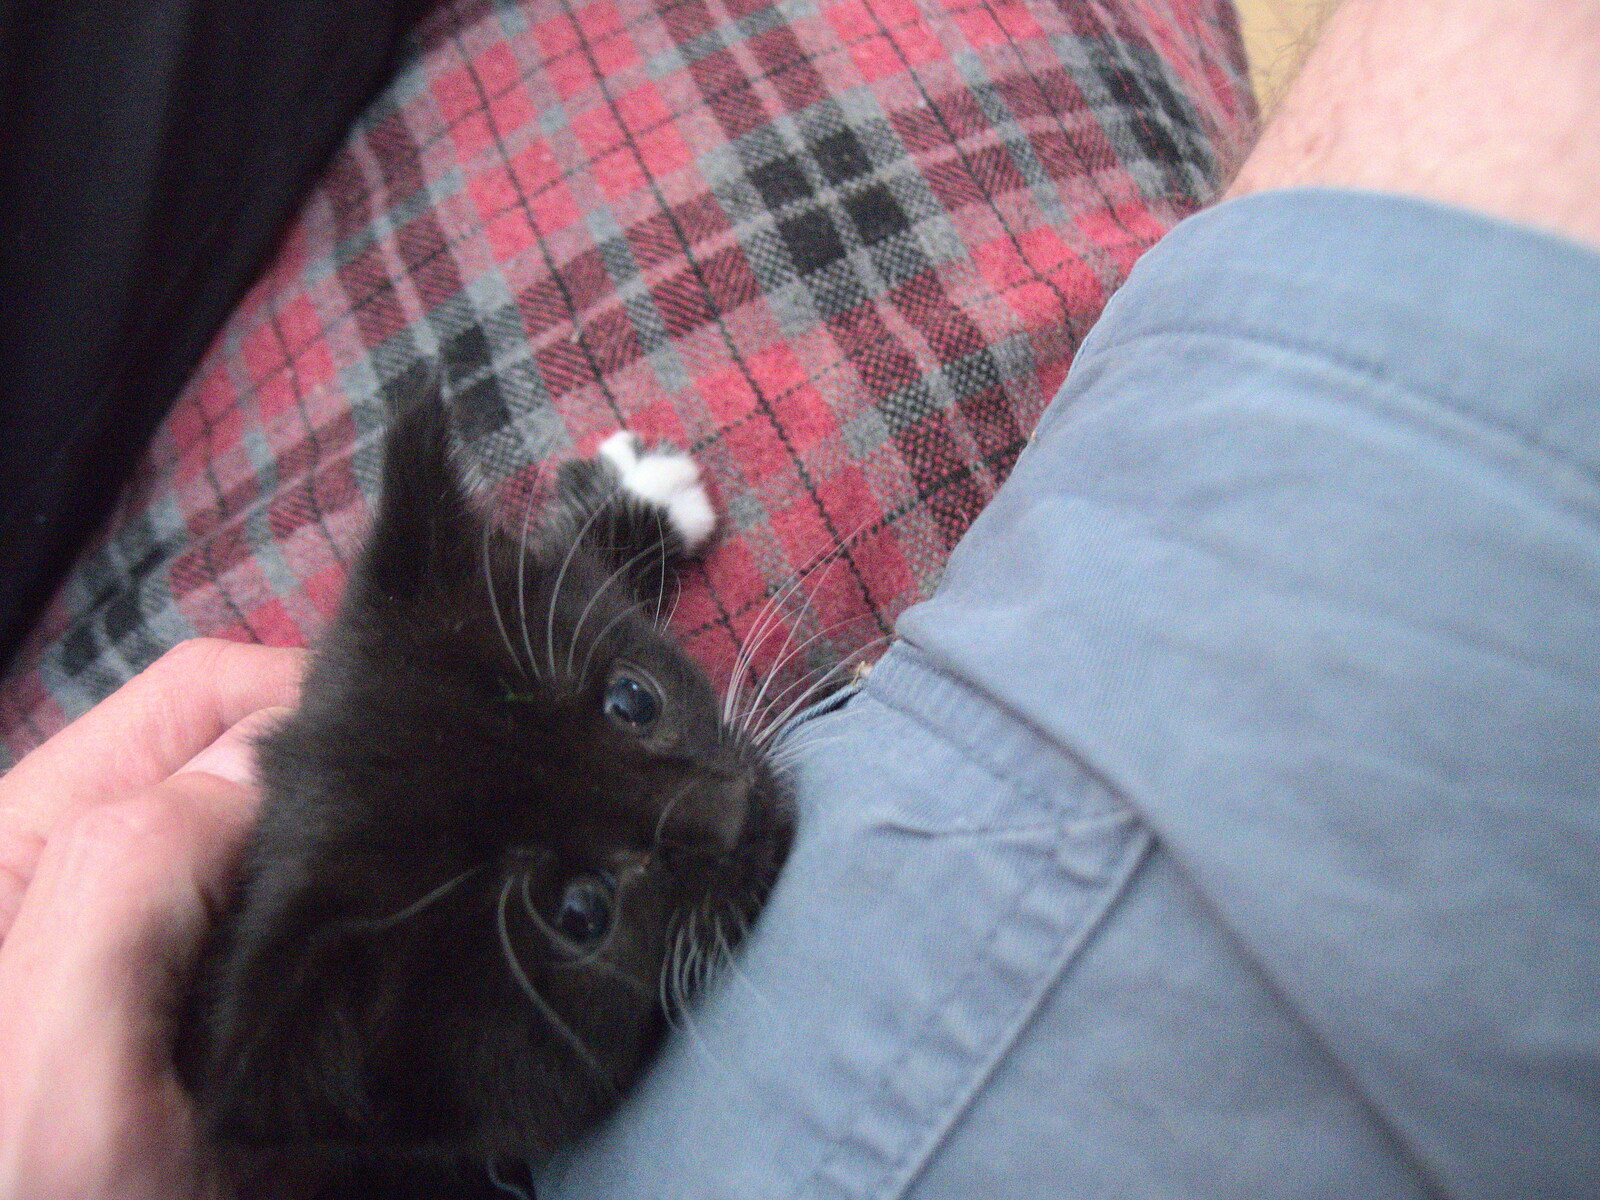 A tiny kitten appears from A Visit to the Kittens, Scarning, Norfolk - 13th June 2021